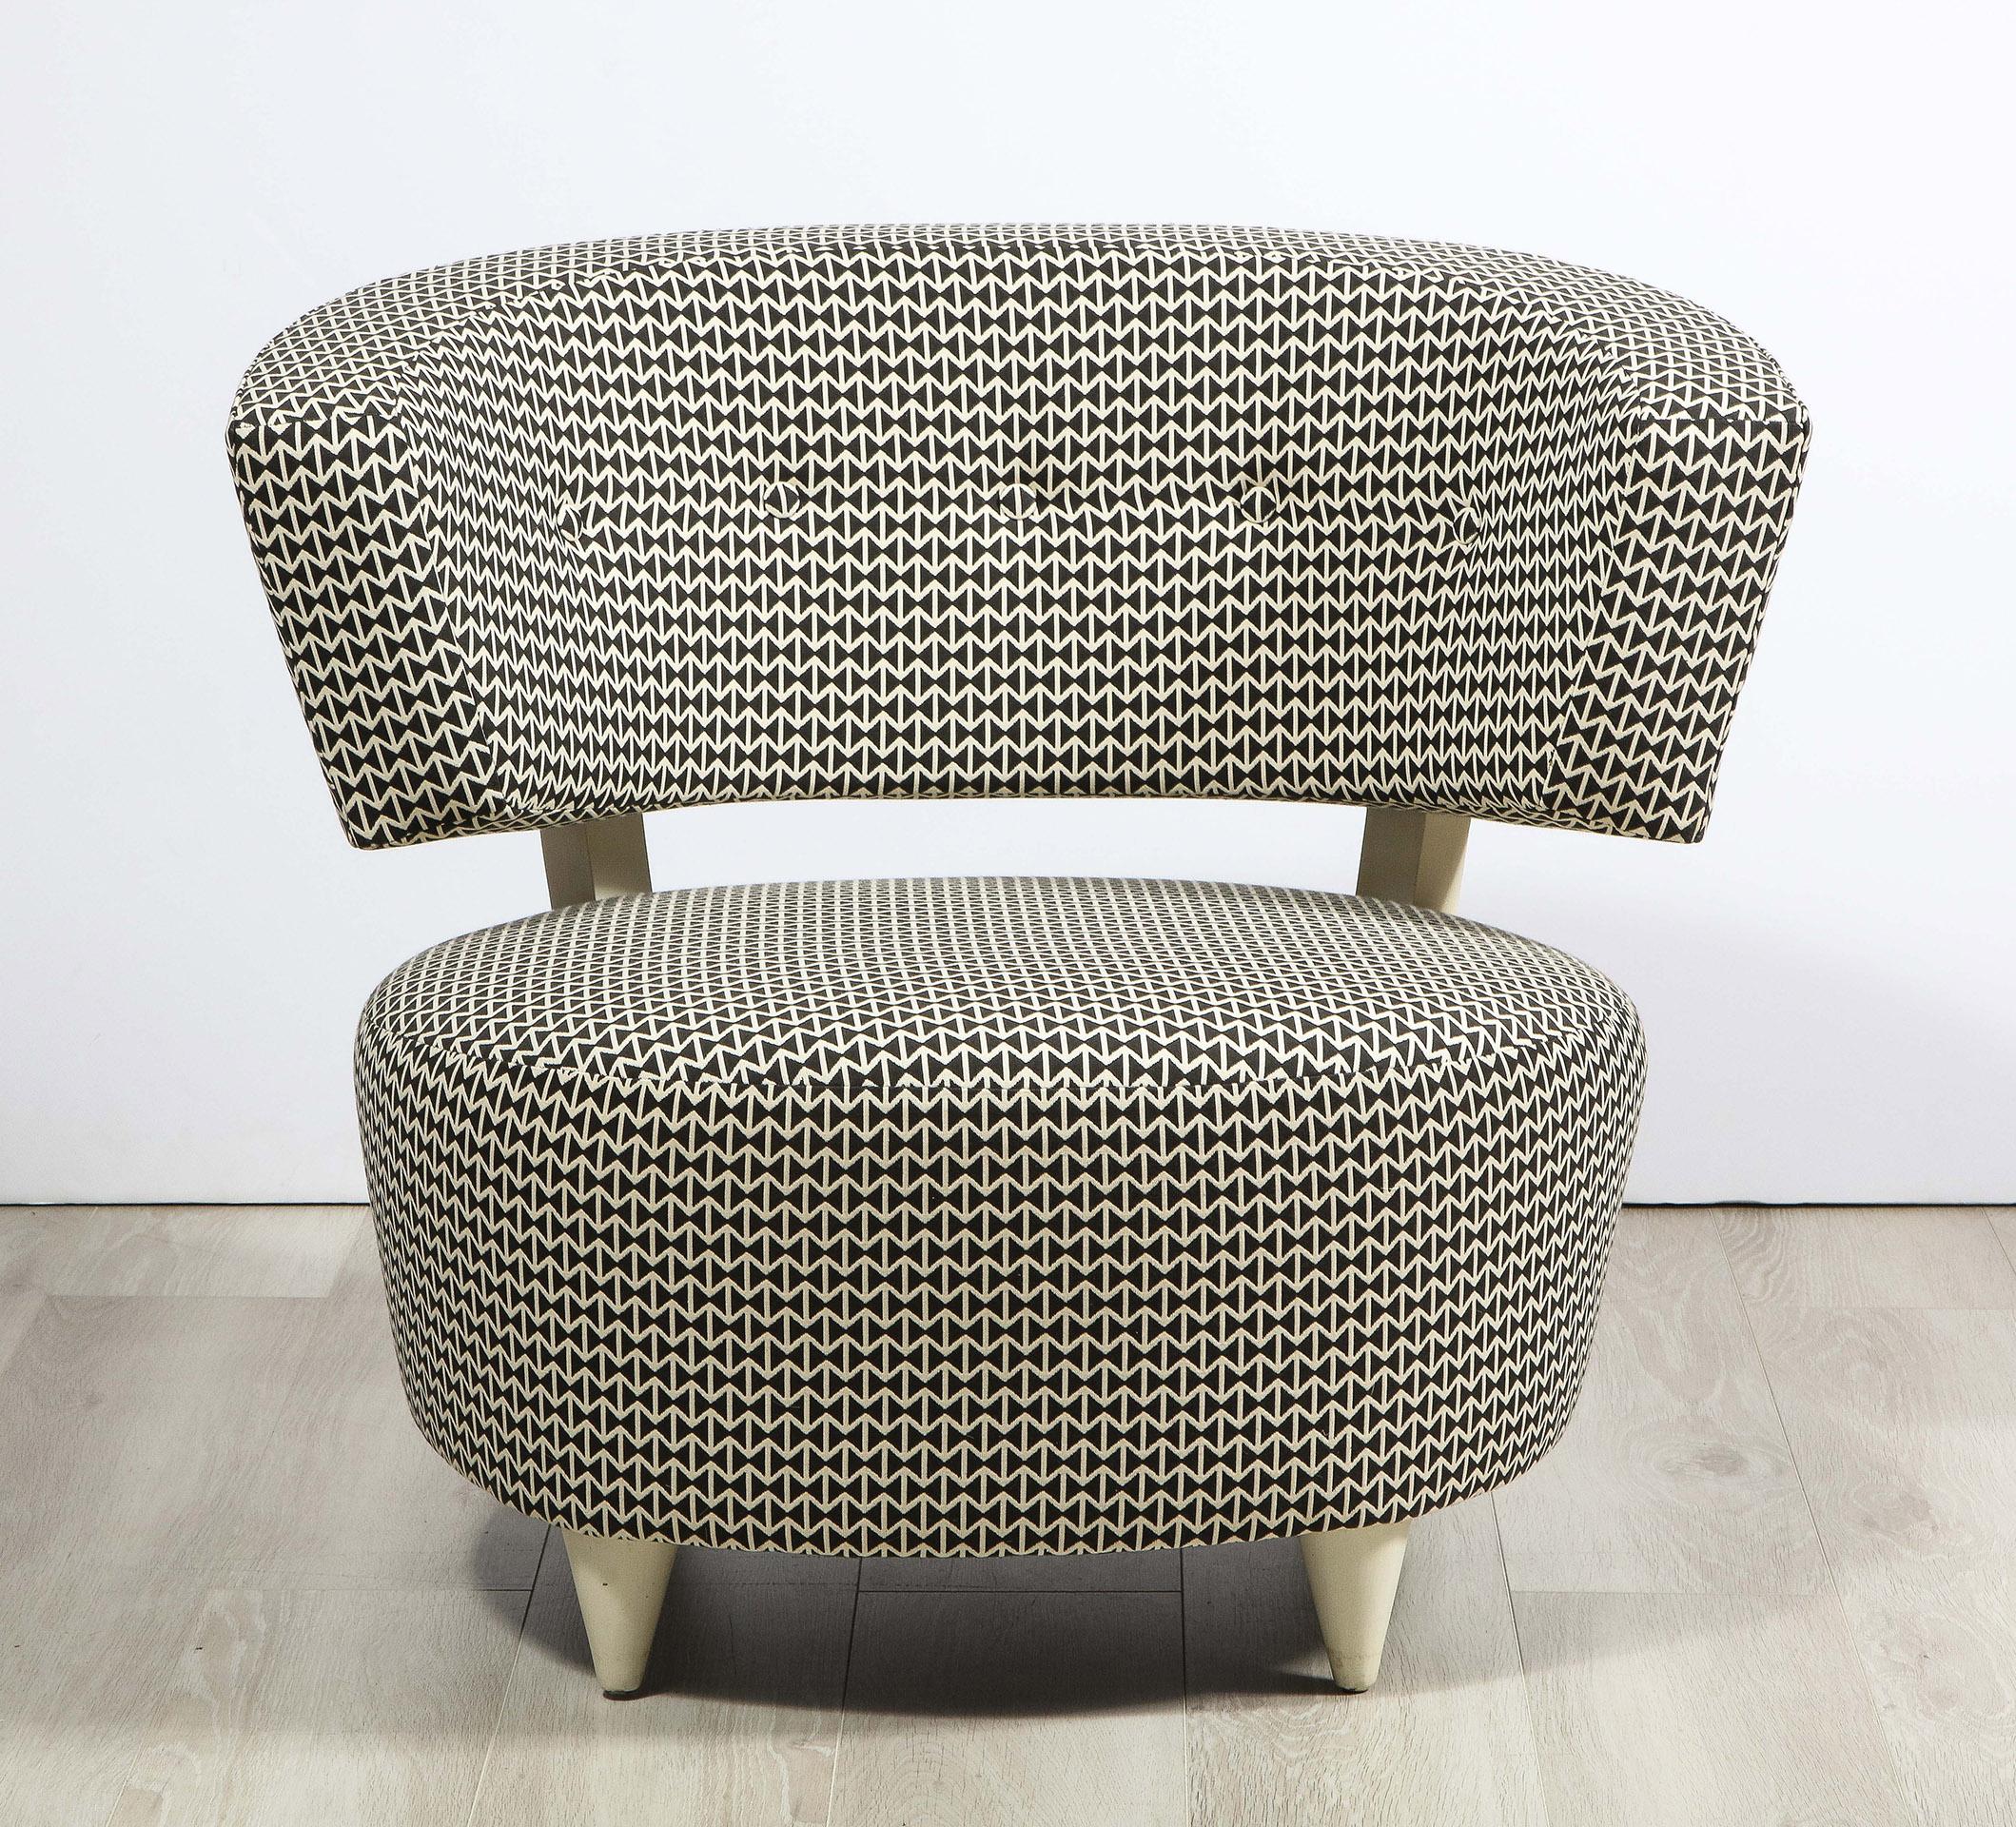 The Gilbert Rohde slipper chair designed for Herman Miller, having an upholstered round seat supporting a separate upholstered back all on four turned legs. 
 